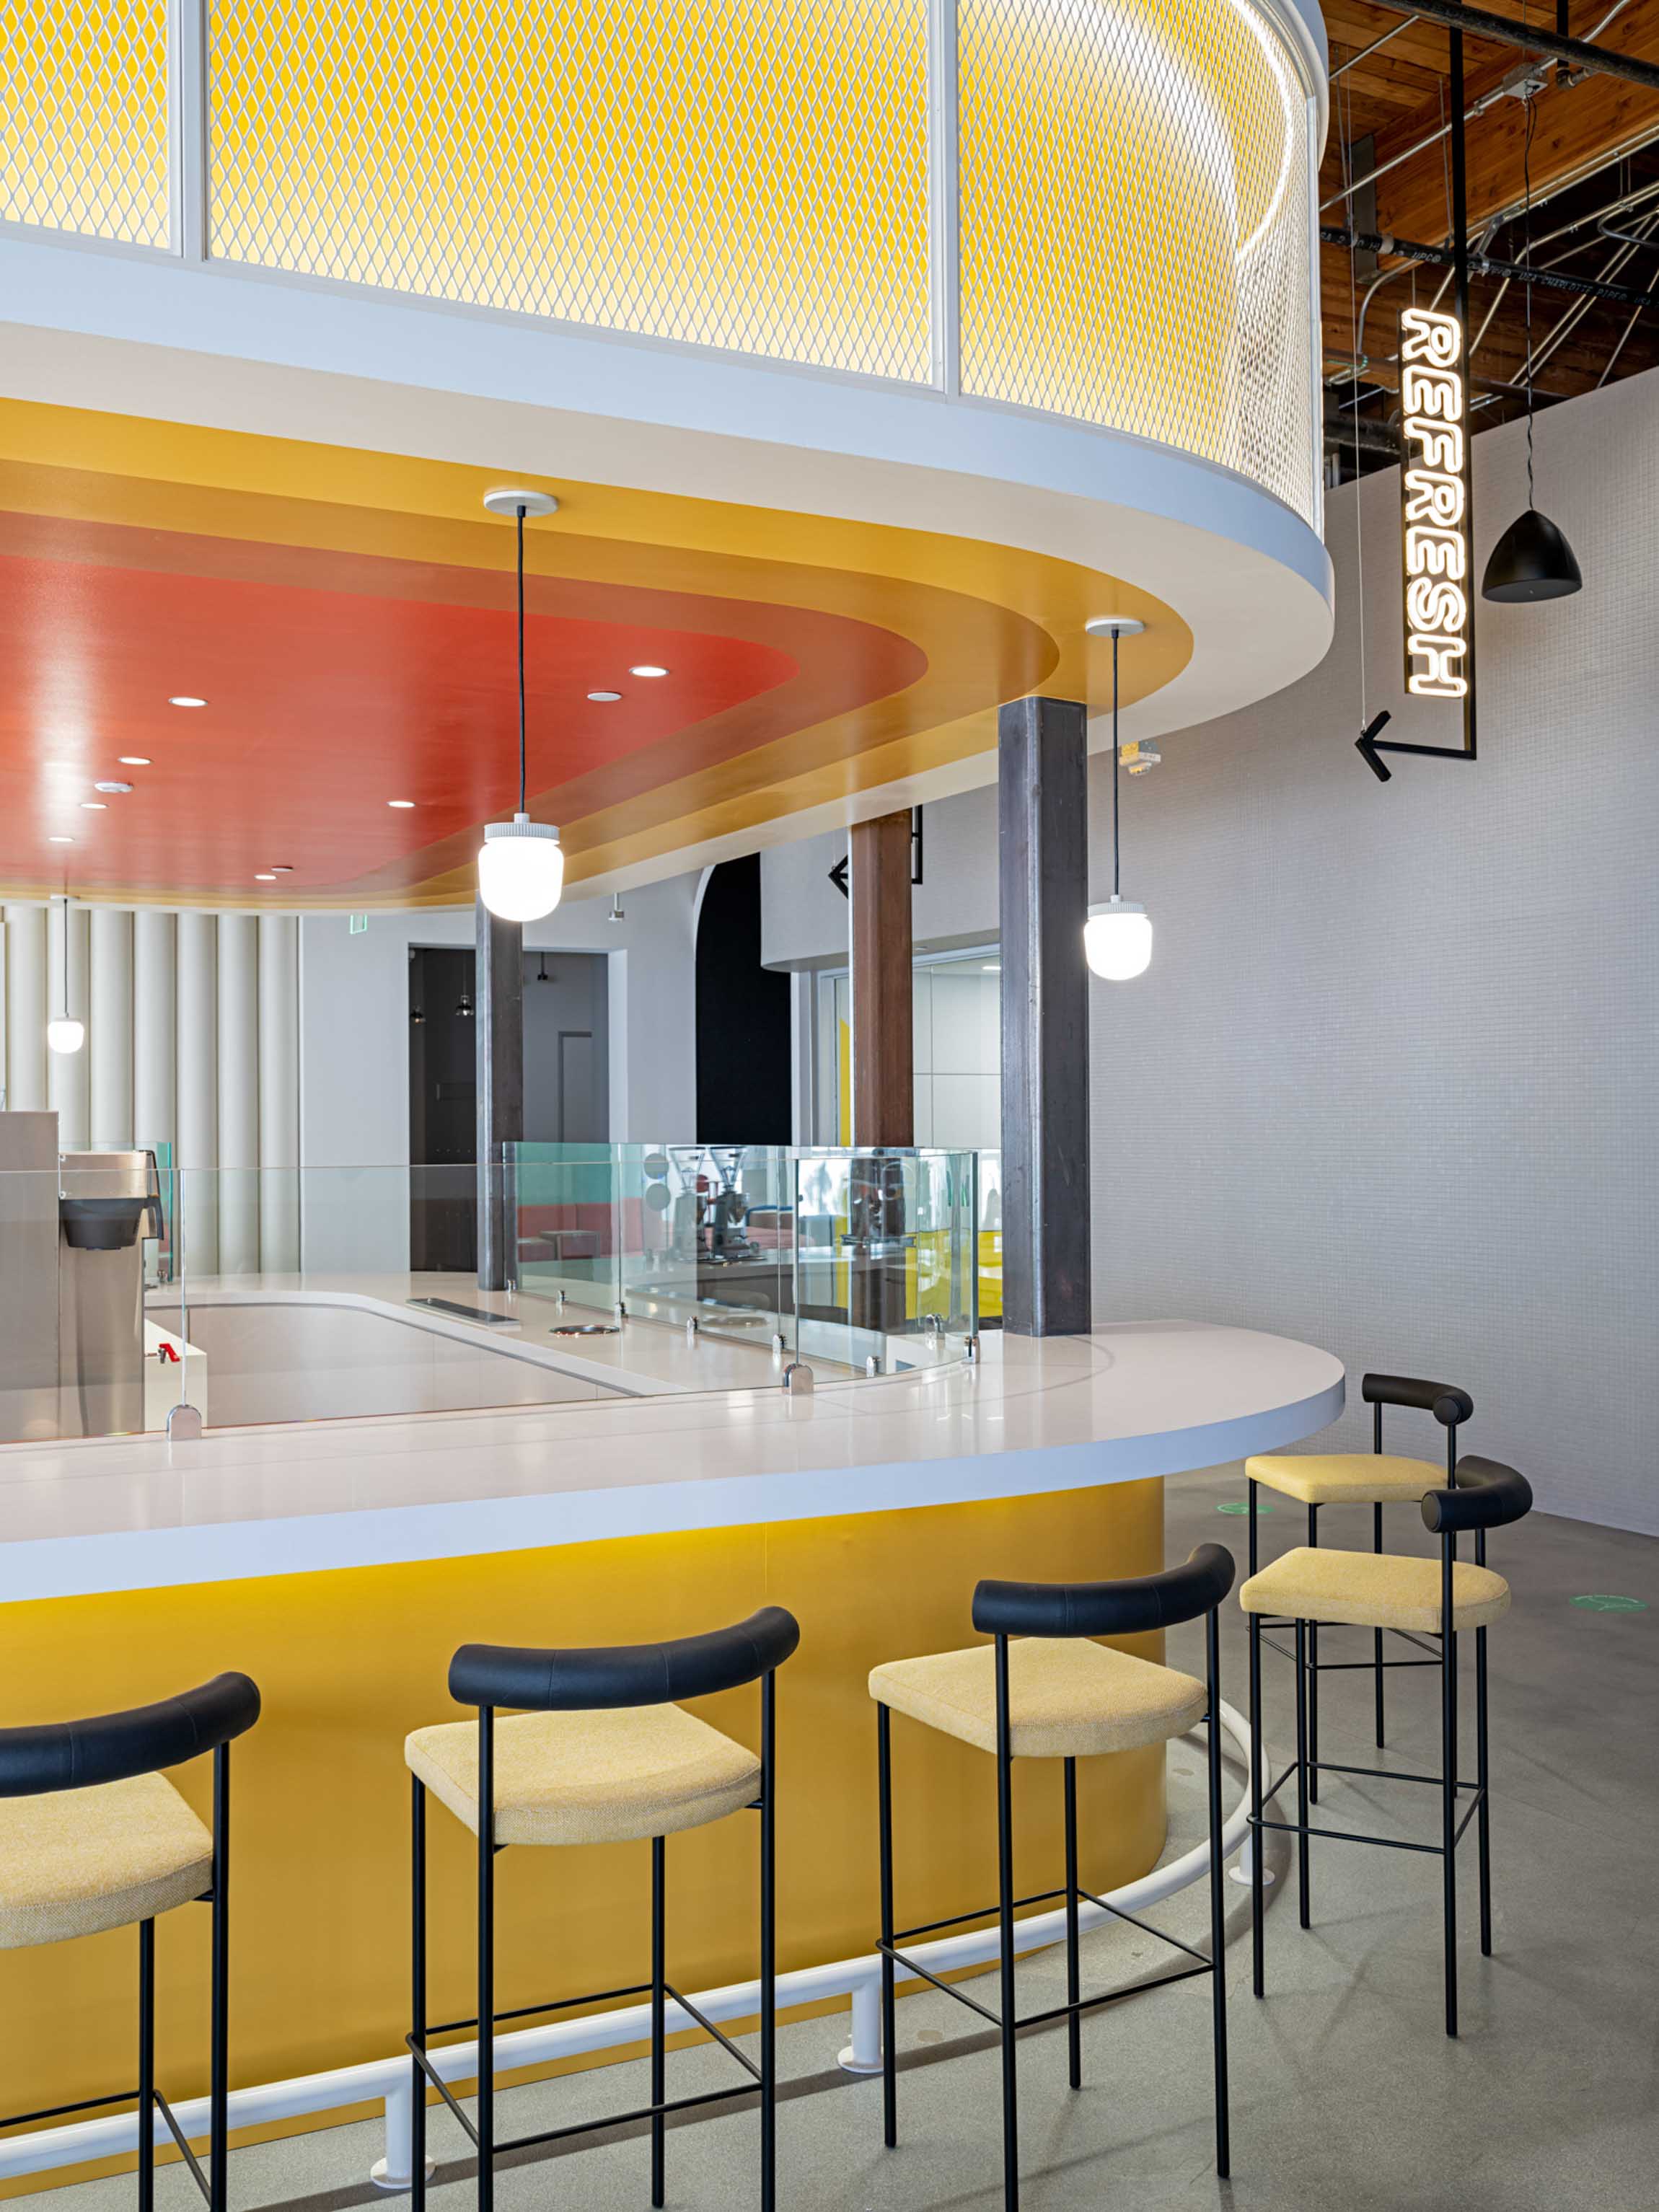 Clean refreshment bar with yellow to red gradient ceiling and yellow bar stools